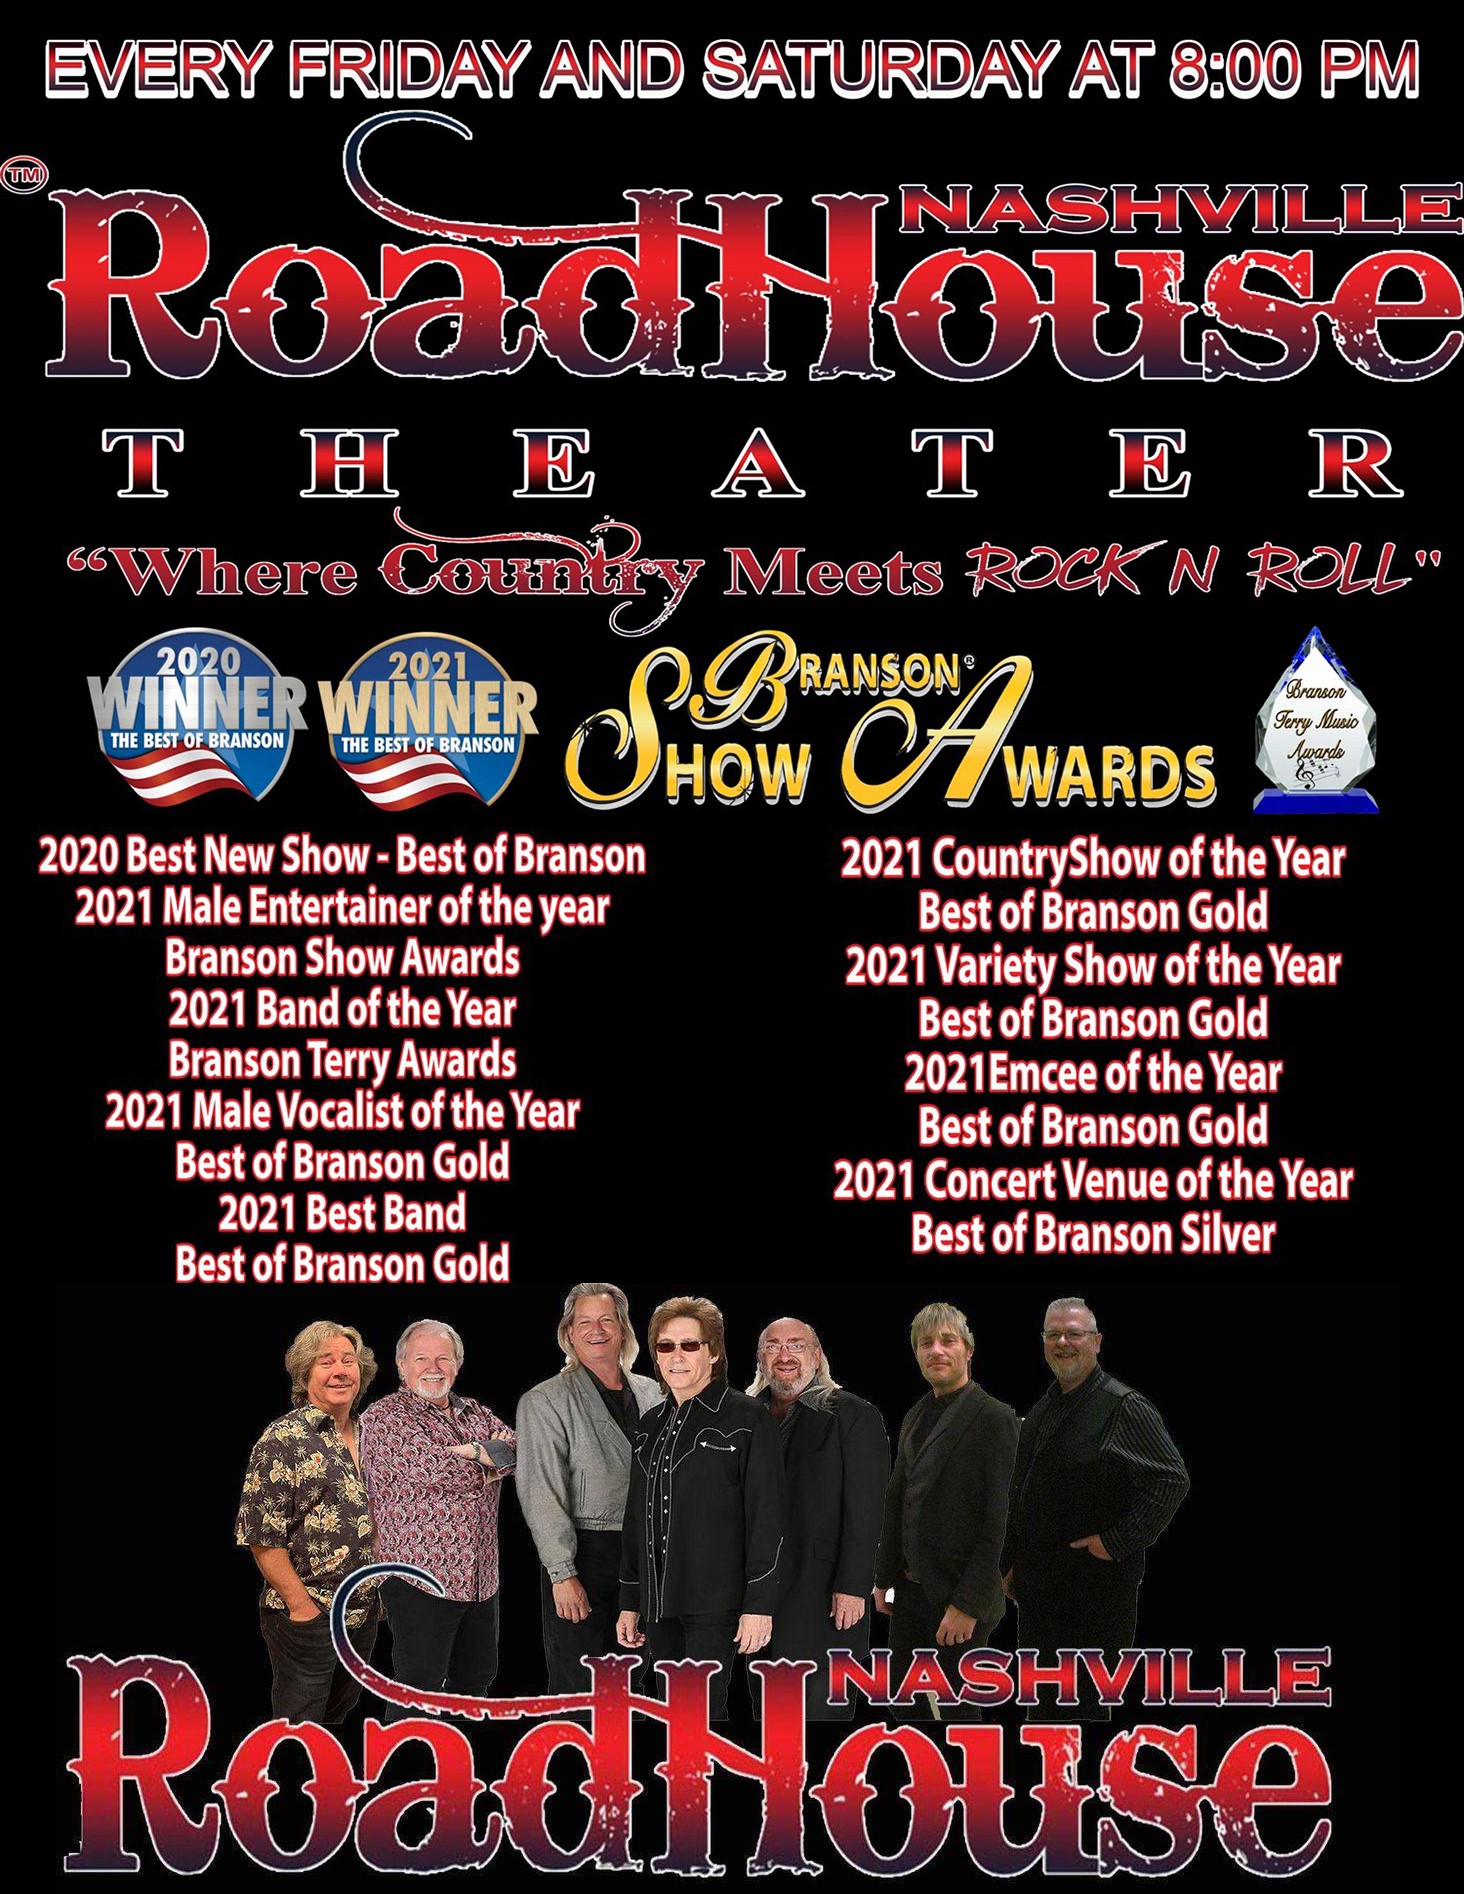 Nashville Roadhouse Live Where Country Meets Rock N Roll on Dec 19, 00:00@Nashville Roadhouse Theater at The Branson Star - Pick a seat, Buy tickets and Get information on nashvilleroadhouse.com bransonstartheater